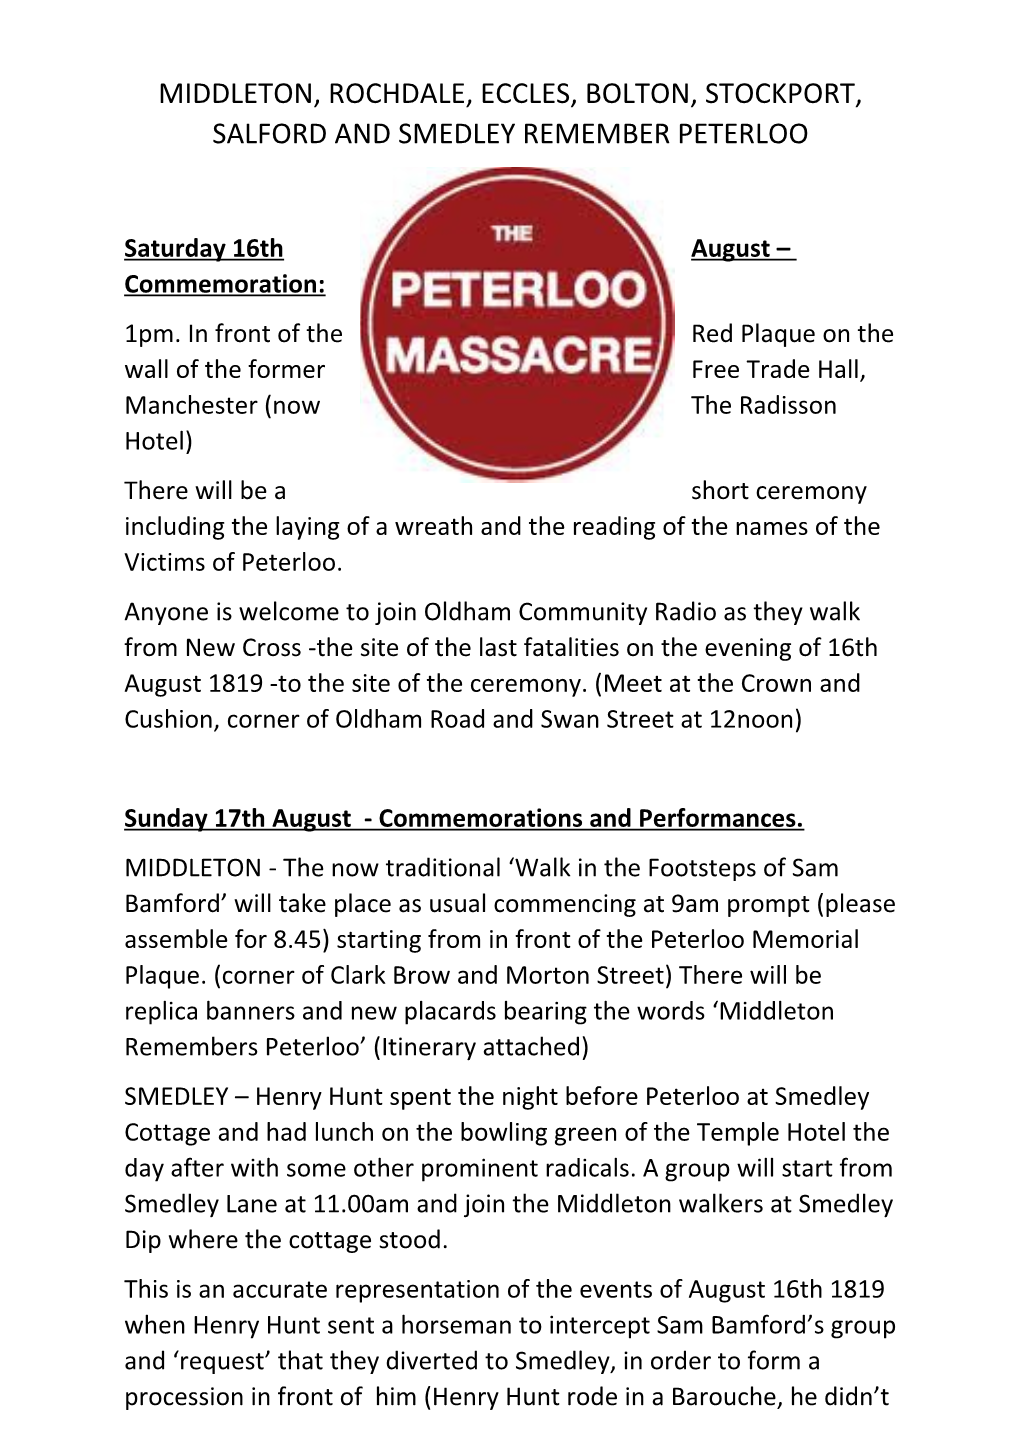 Middleton, Rochdale, Eccles, Bolton, Stockport, Salford and Smedley Remember Peterloo